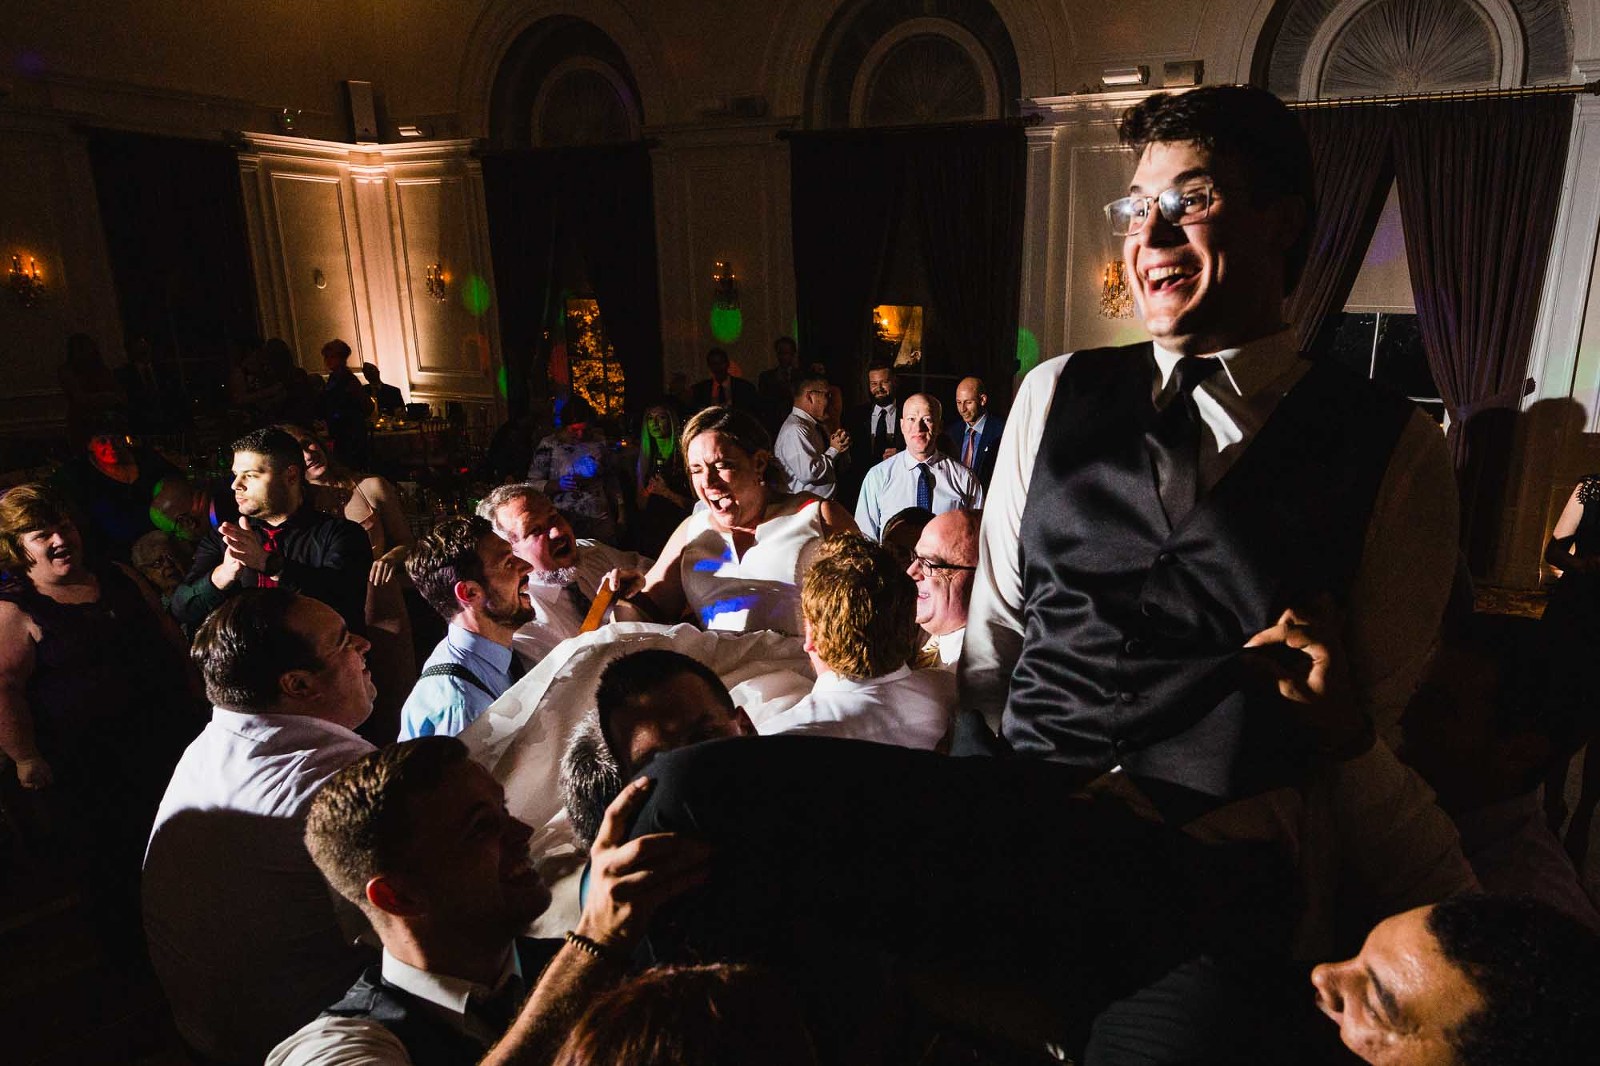 groom lifted up on chair during wedding reception, surrounded by cheering guests